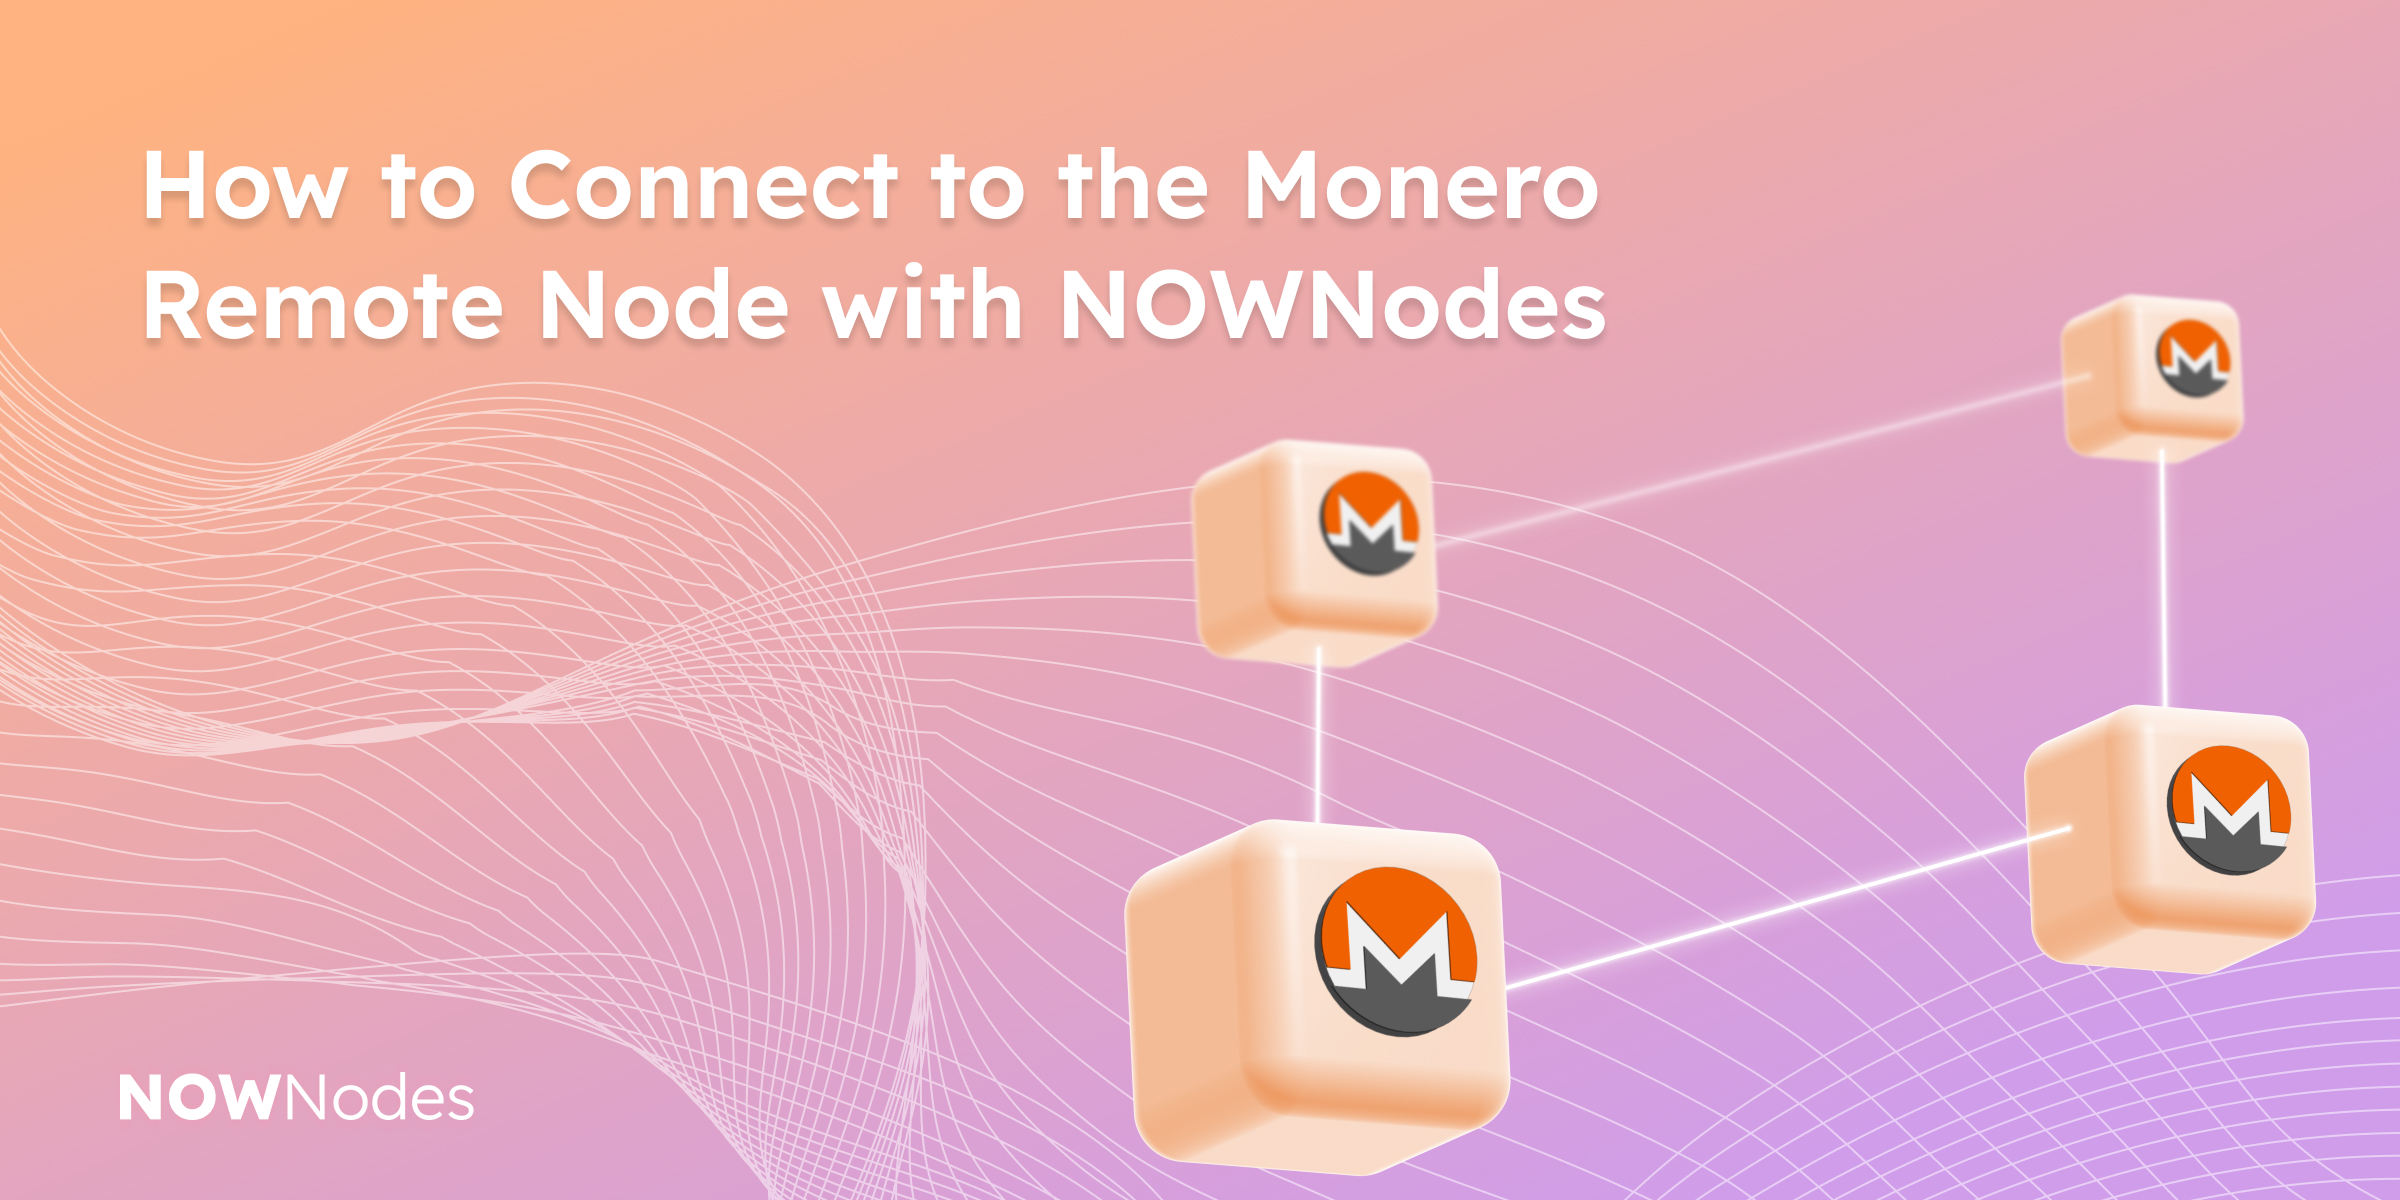 How to Connect to the Monero Remote Node with NOWNodes